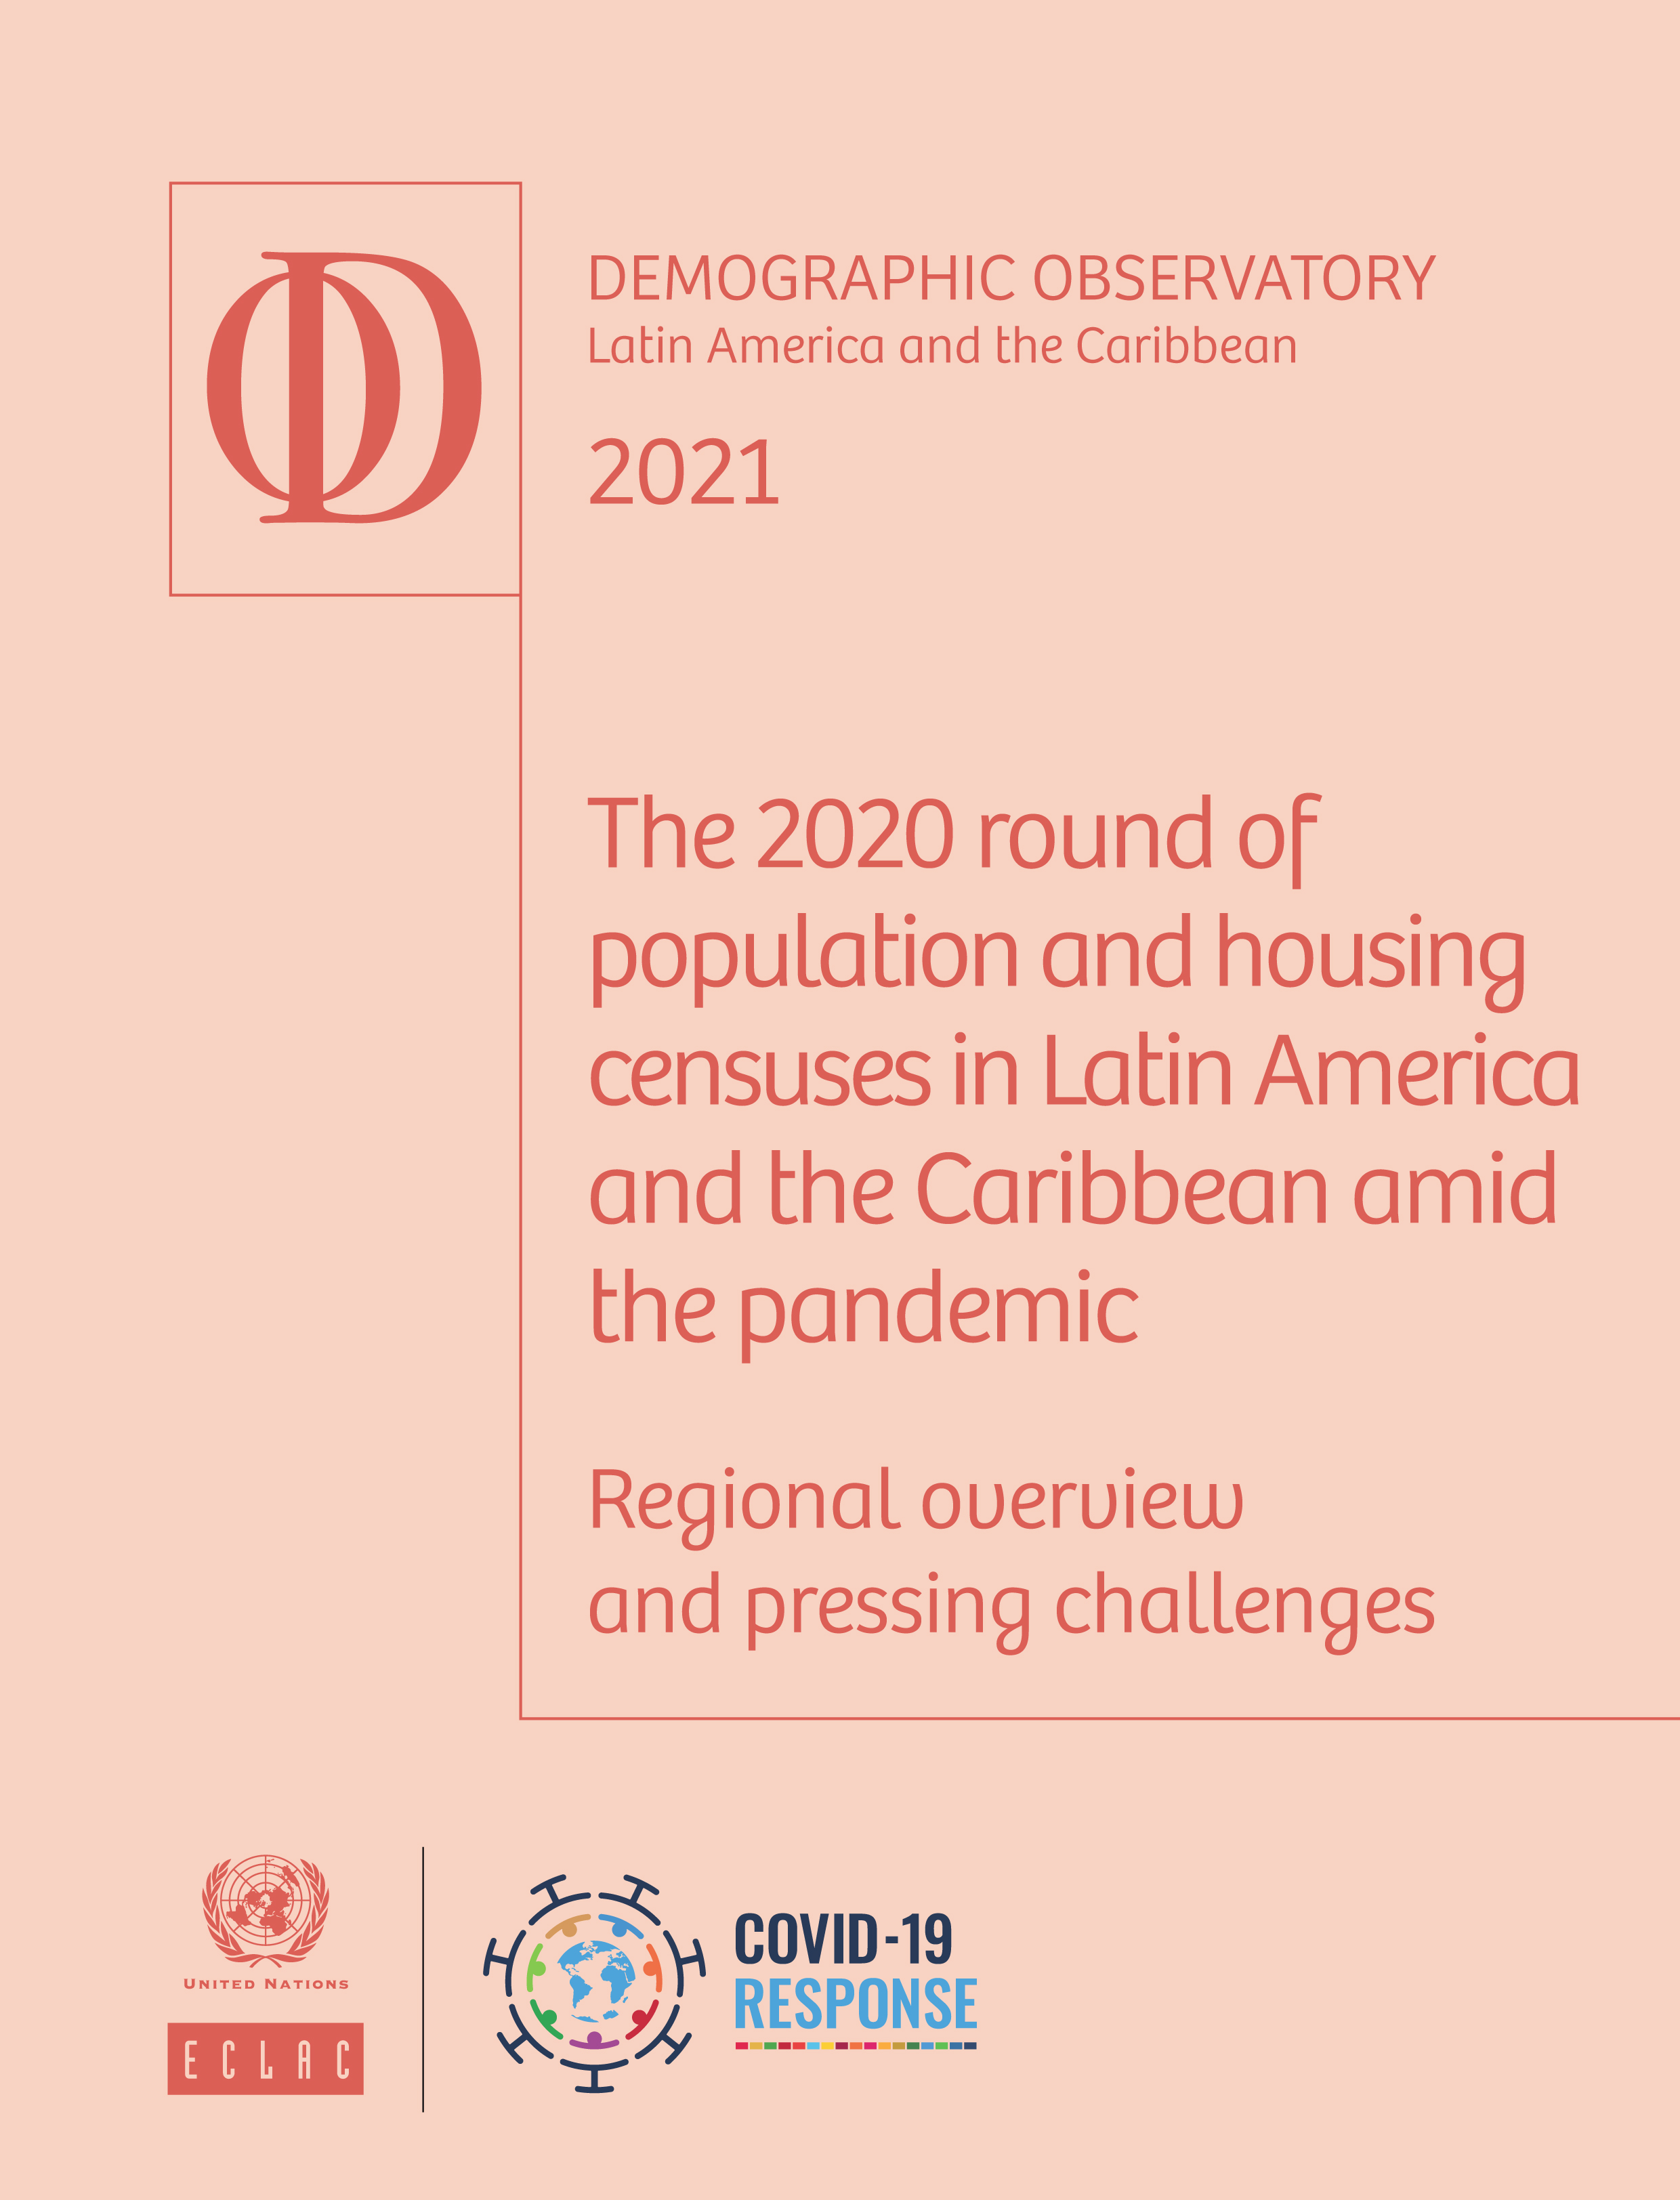 image of Latin America and the Caribbean Demographic Observatory 2021